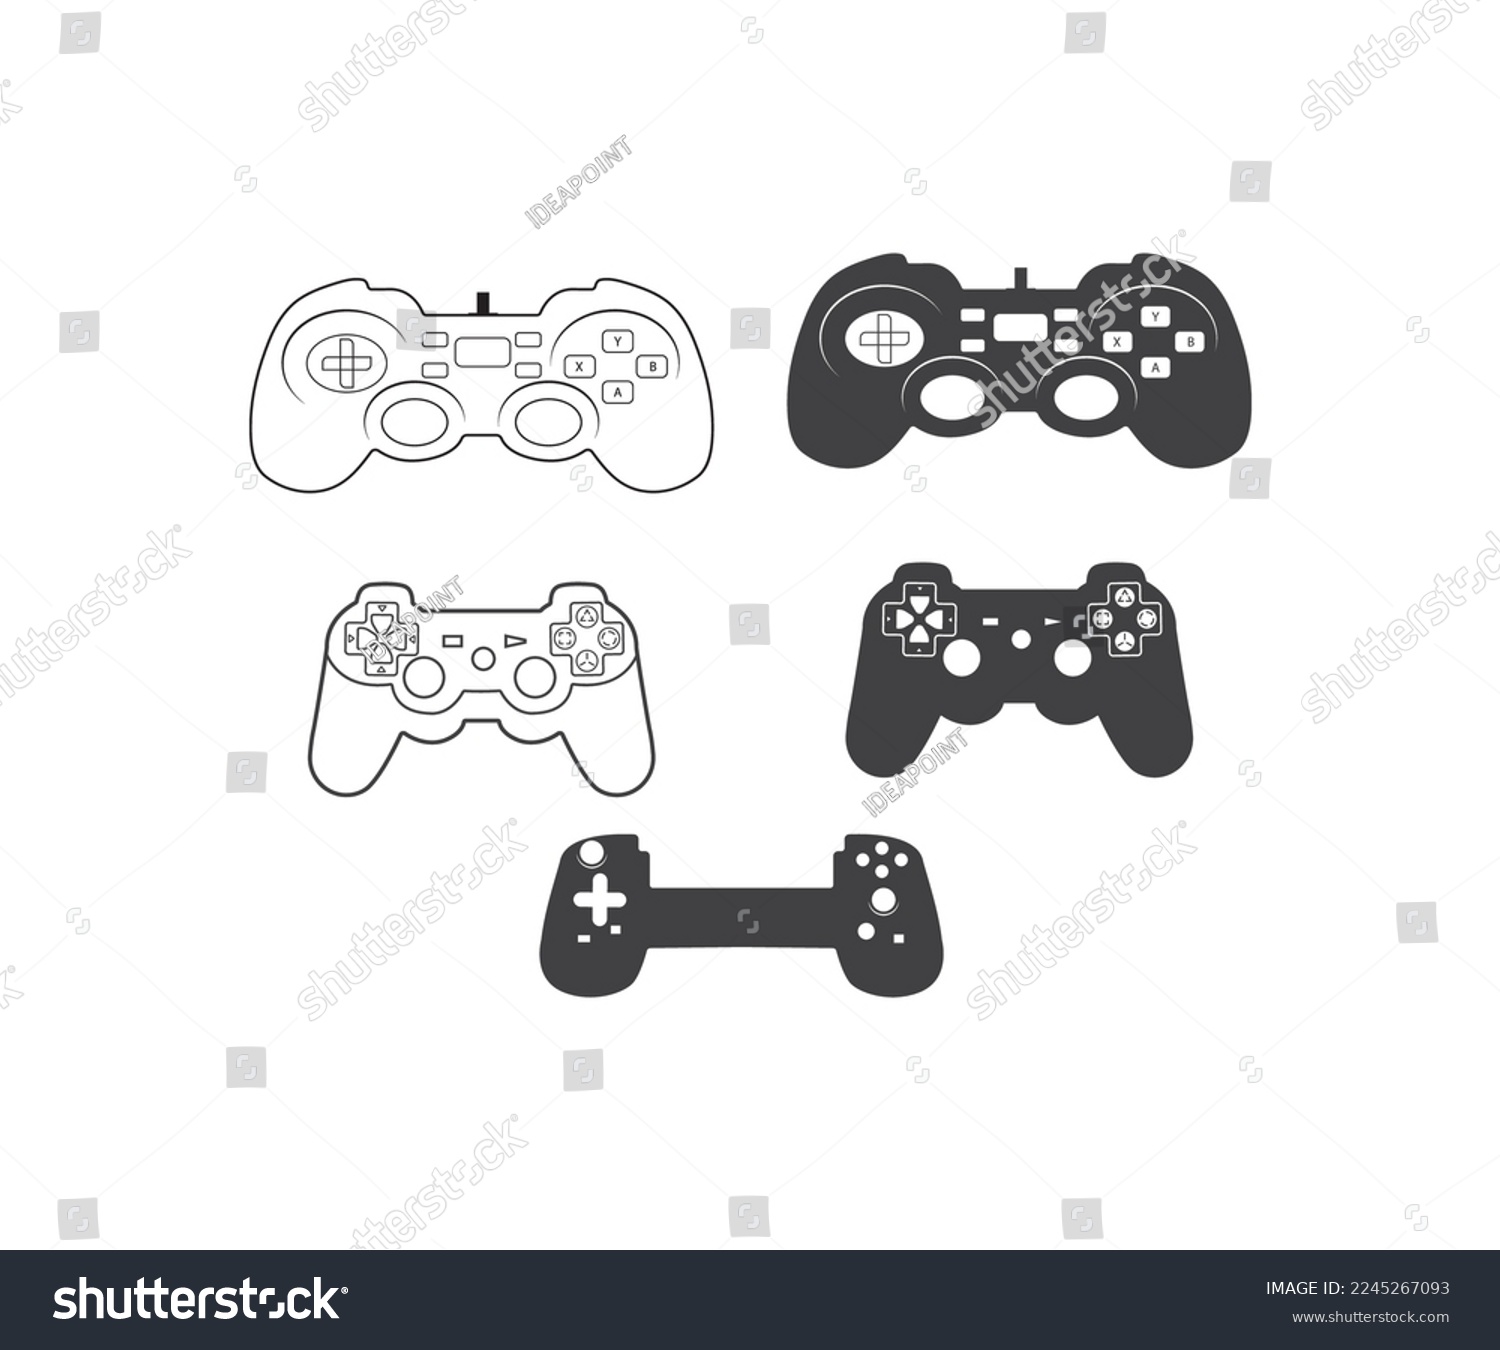 SVG of Video game controller Vectore, game controller SVG, EPS, svg